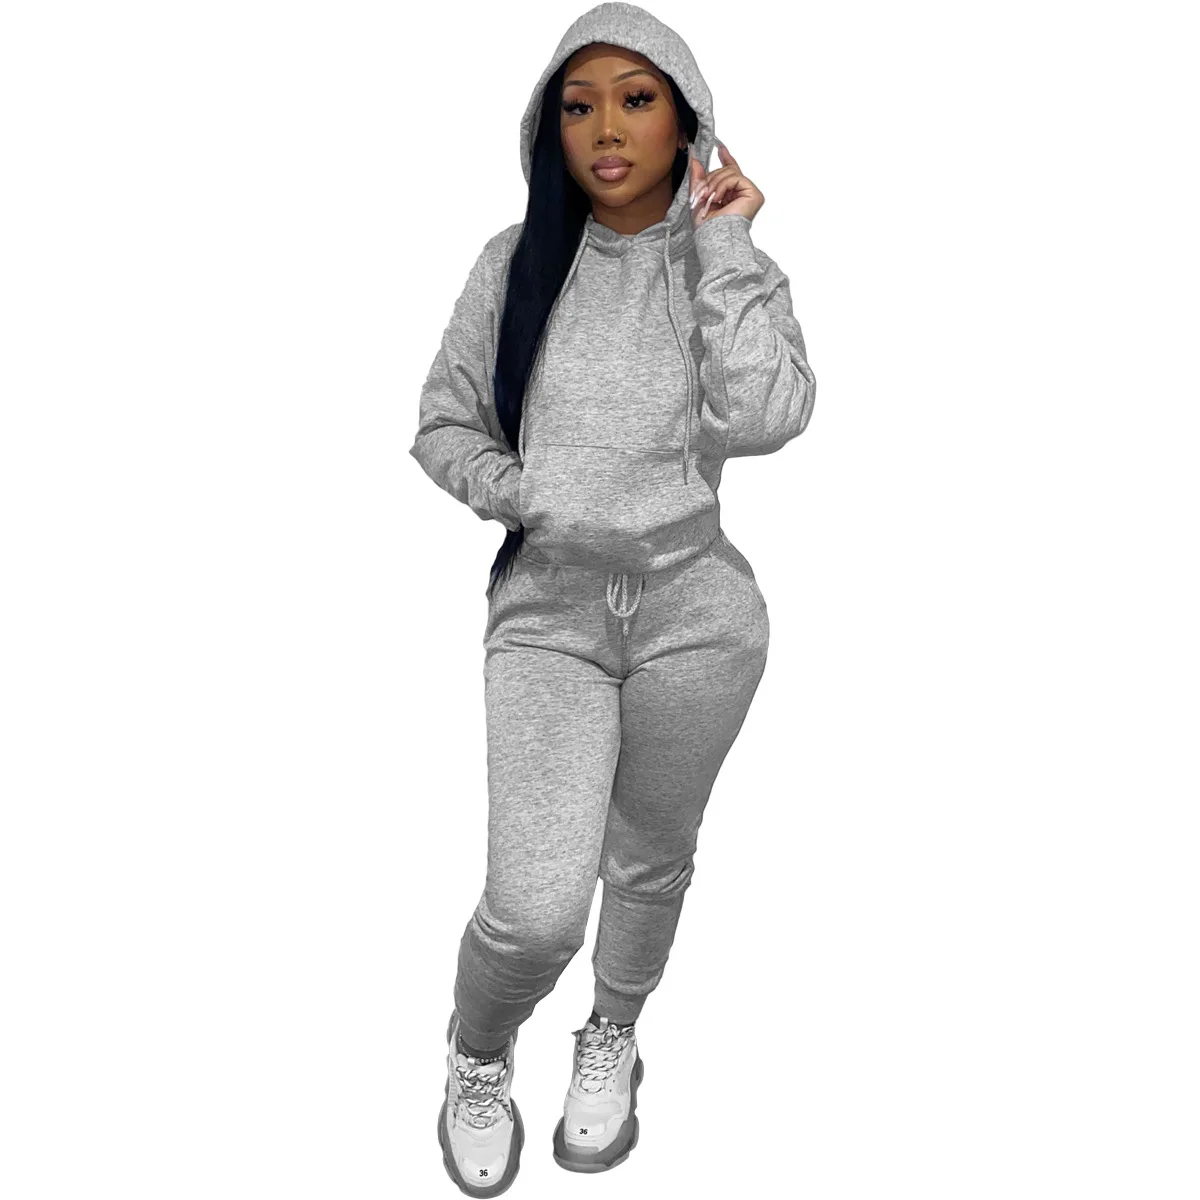 2022 Autumn and Winter Women's Fleece Sweater Women's Two-piece Hoodie Suit Casual Sports Suit 2 Piece Sets Womens Outfits